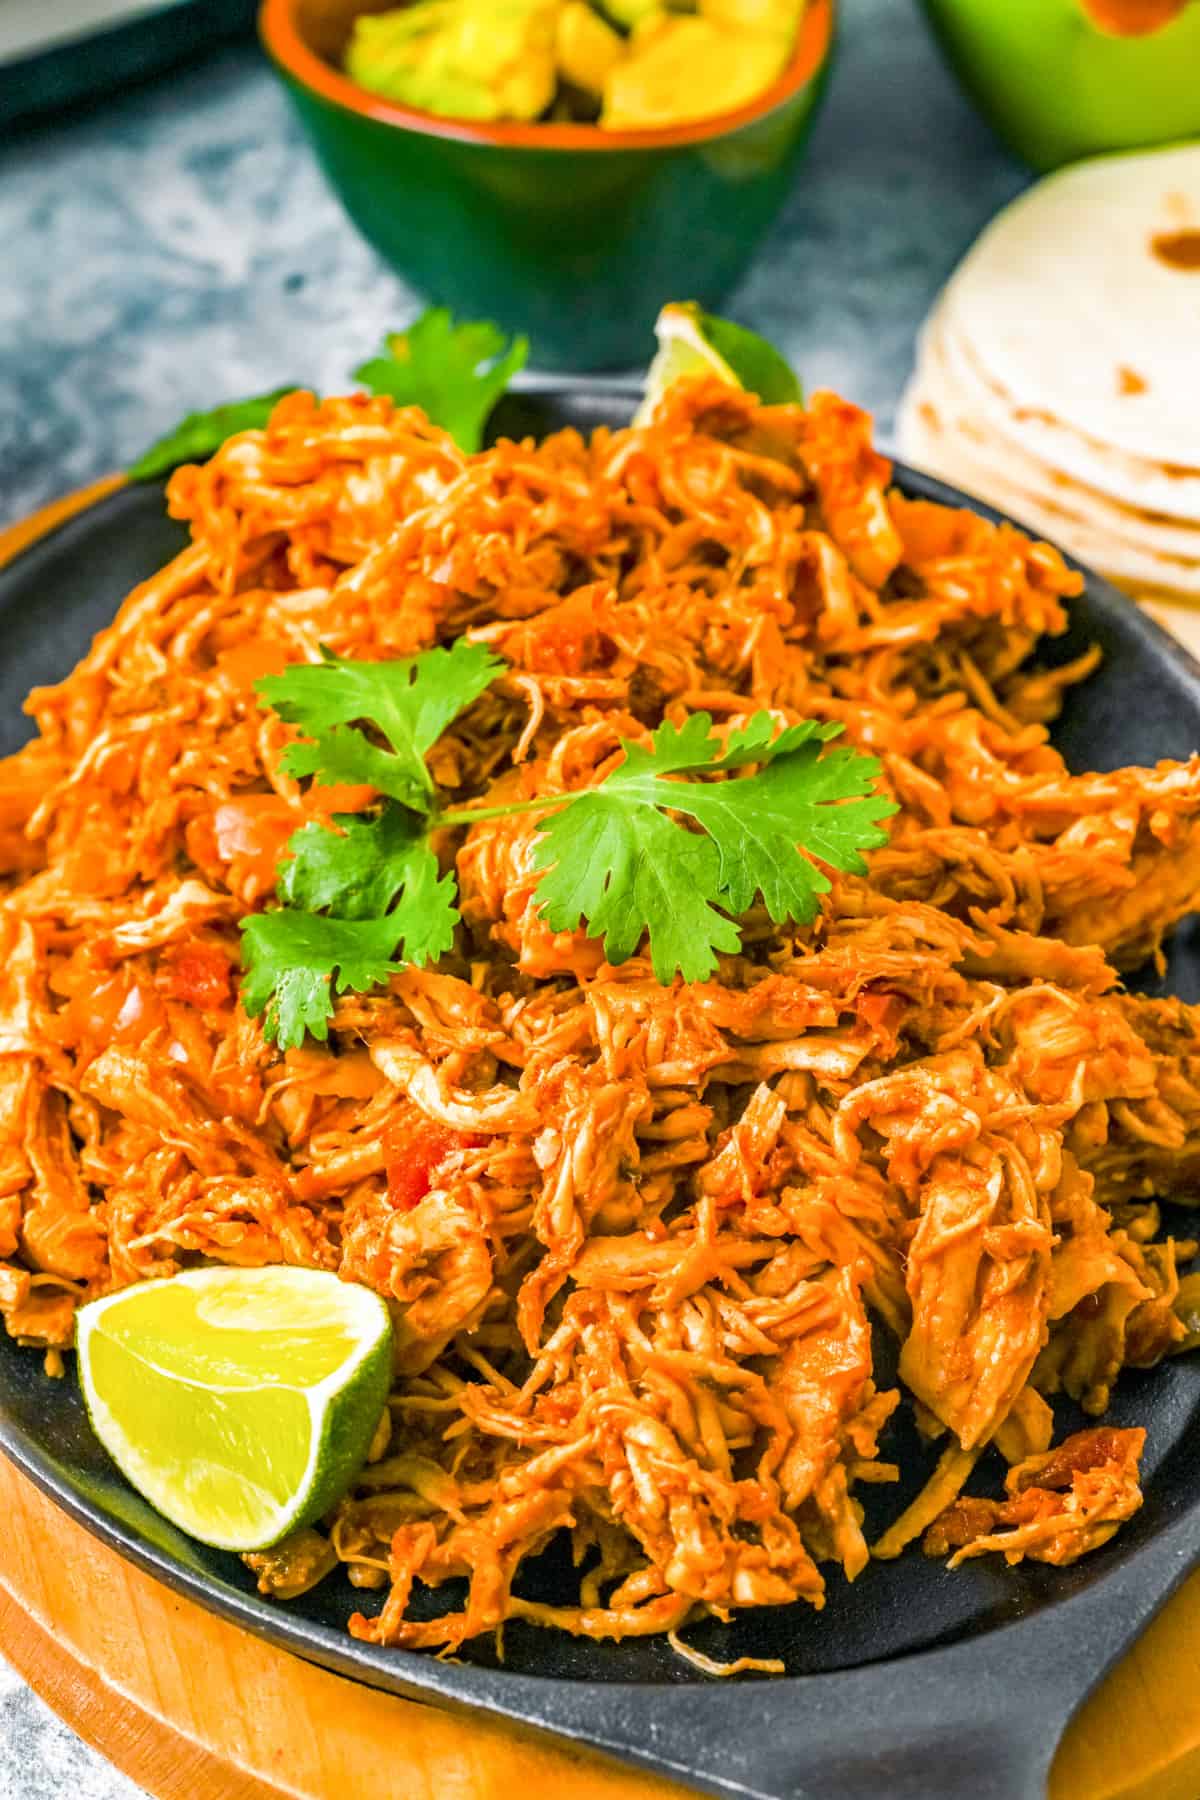 Slow Cooker Shredded Mexican Chicken on hot plate topped with cilantro and limes.